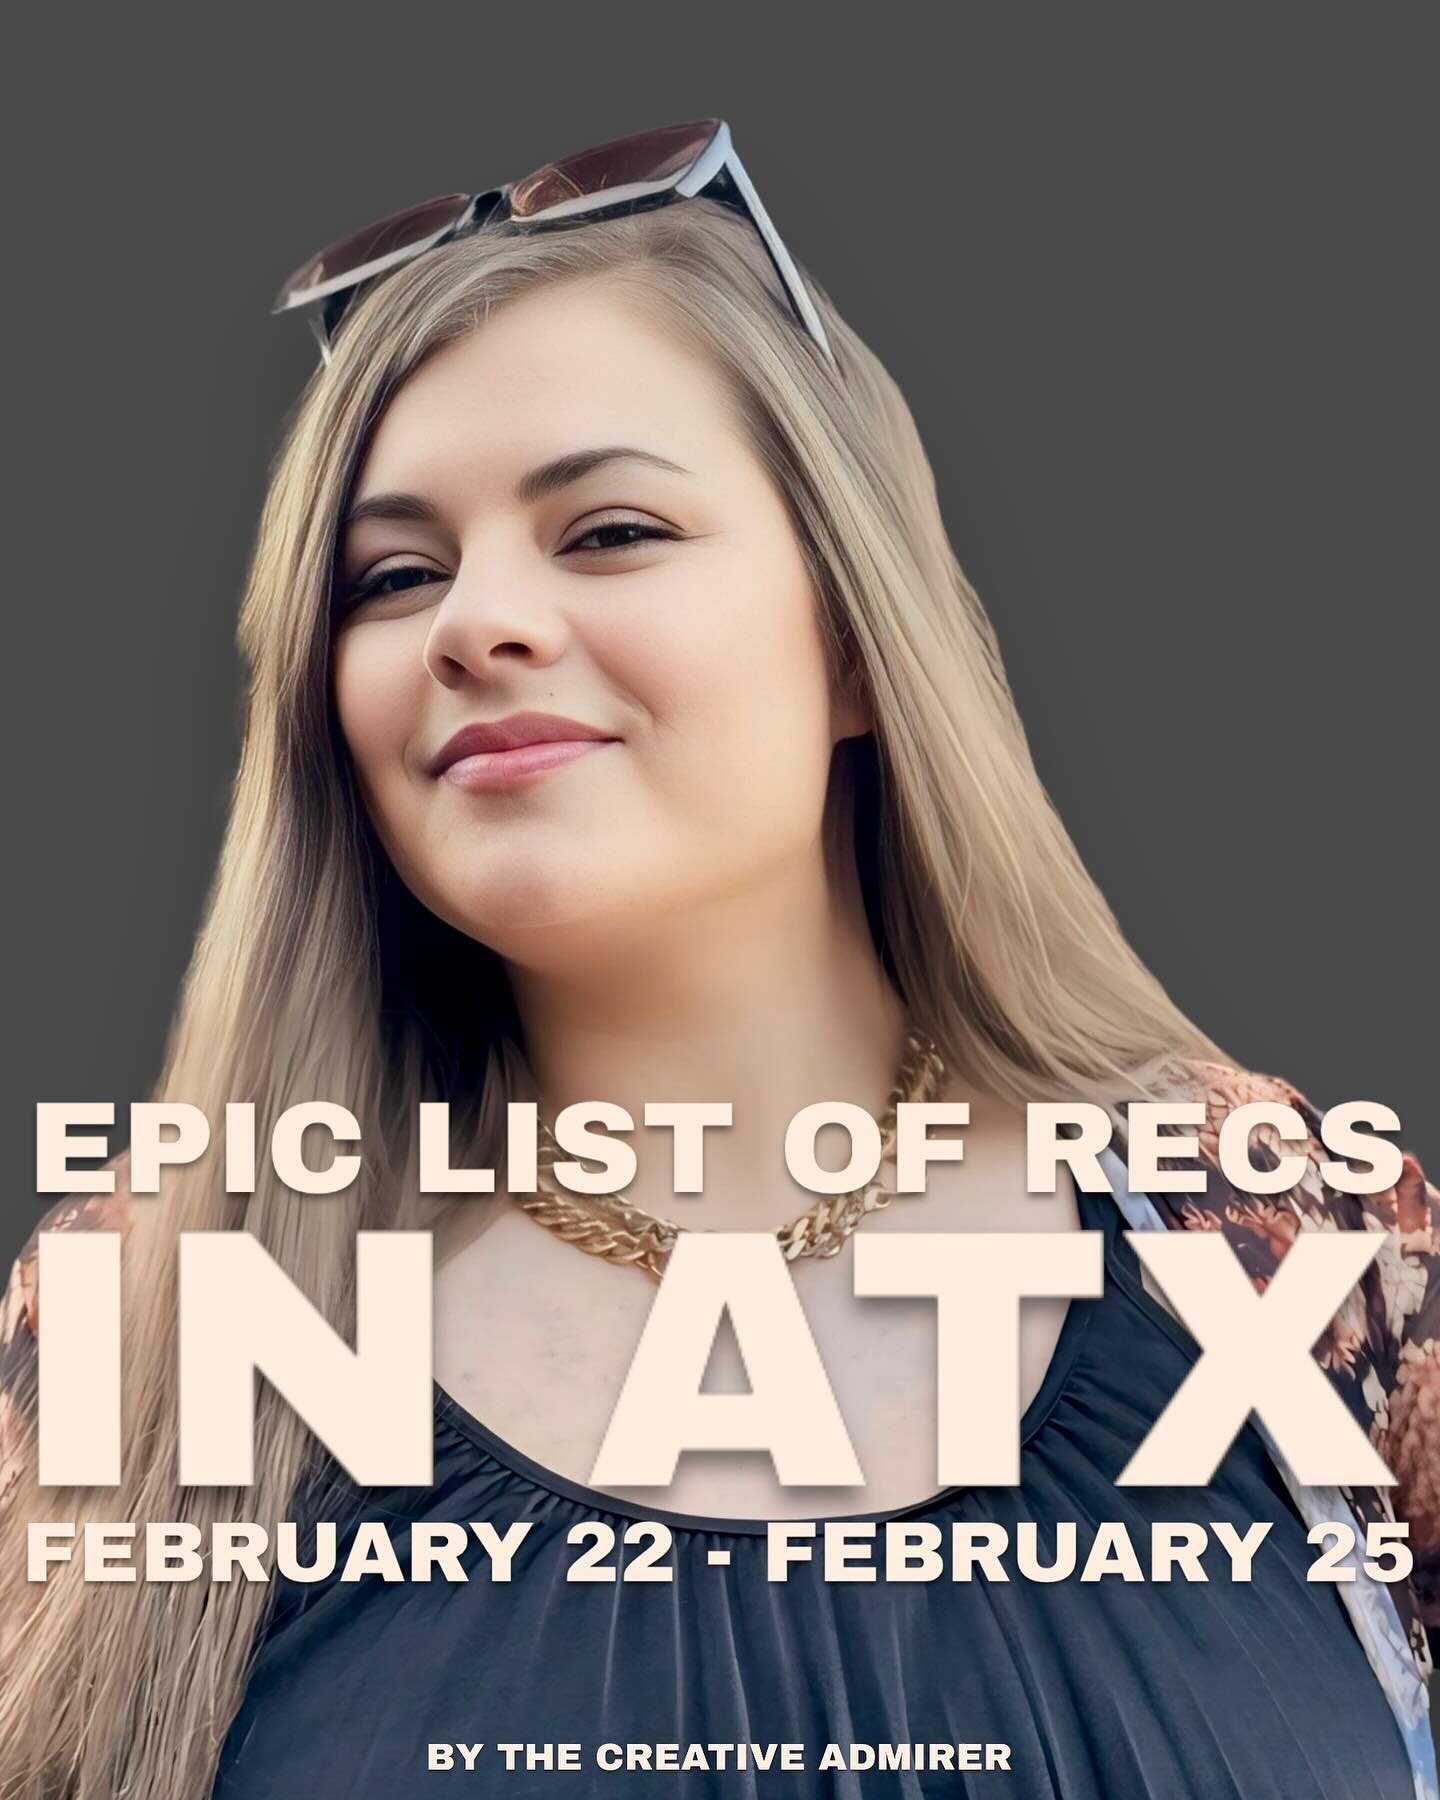 EPIC LIST OF ATX RECS 🙌 Thursday, February 22 - Sunday, February 25
&nbsp;
There have been some great SXSW announcements start to trickle in! 

But before we get too distracted with those shenanigans, this weekend&rsquo;s recs are looking funnn with